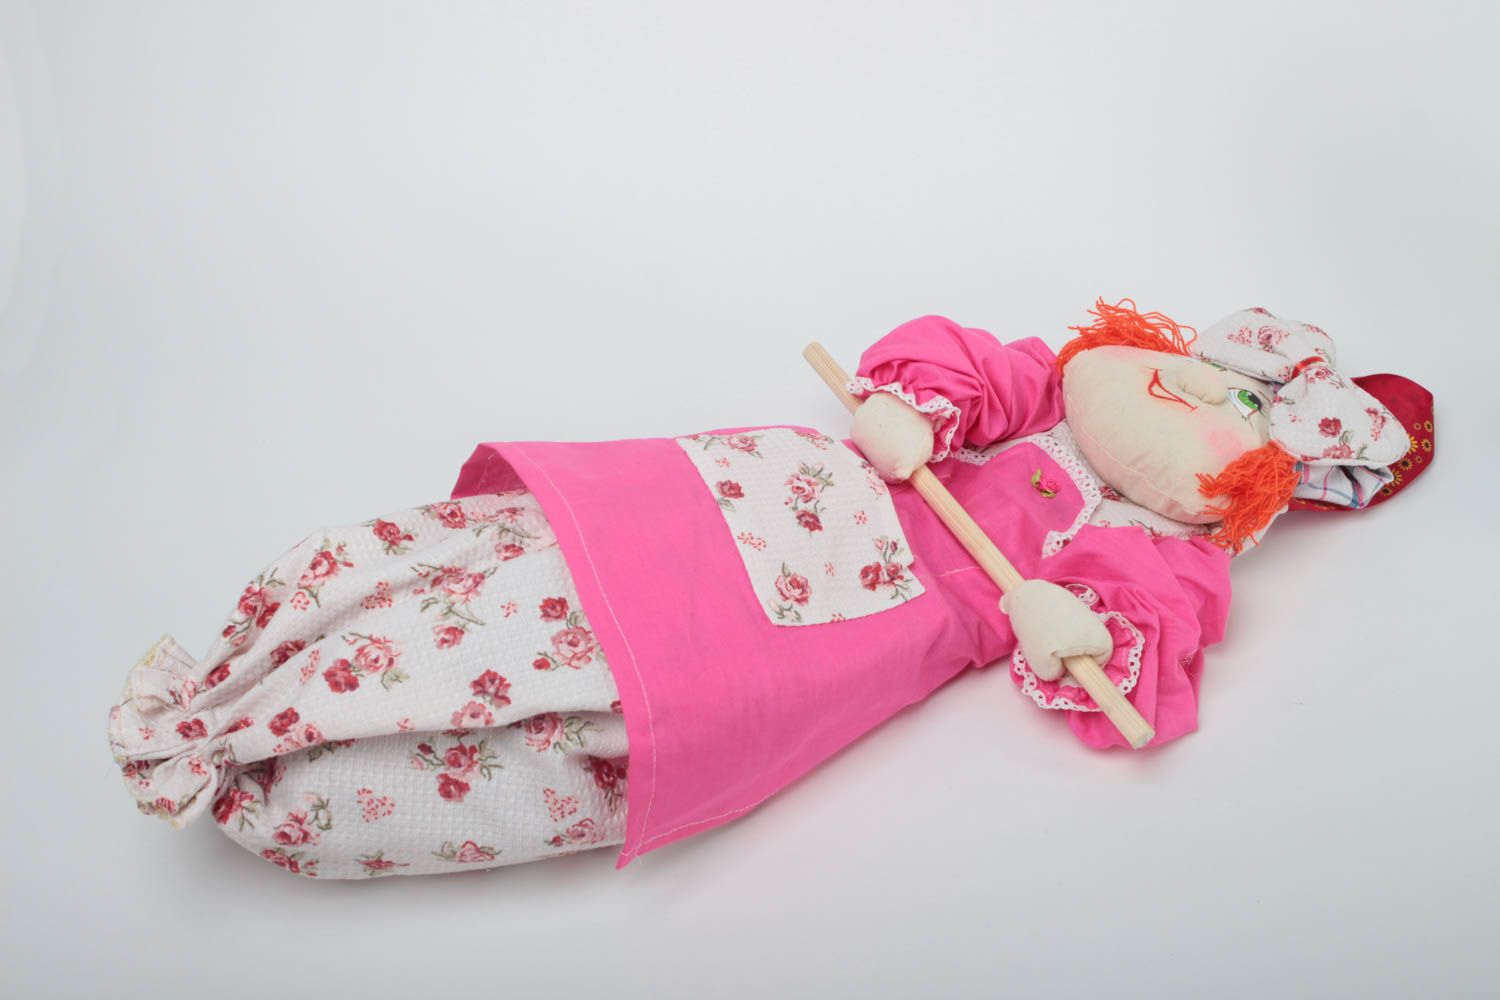 Handmade soft toy rag doll stuffed toy for keeping plastic bags kitchen designs photo 2